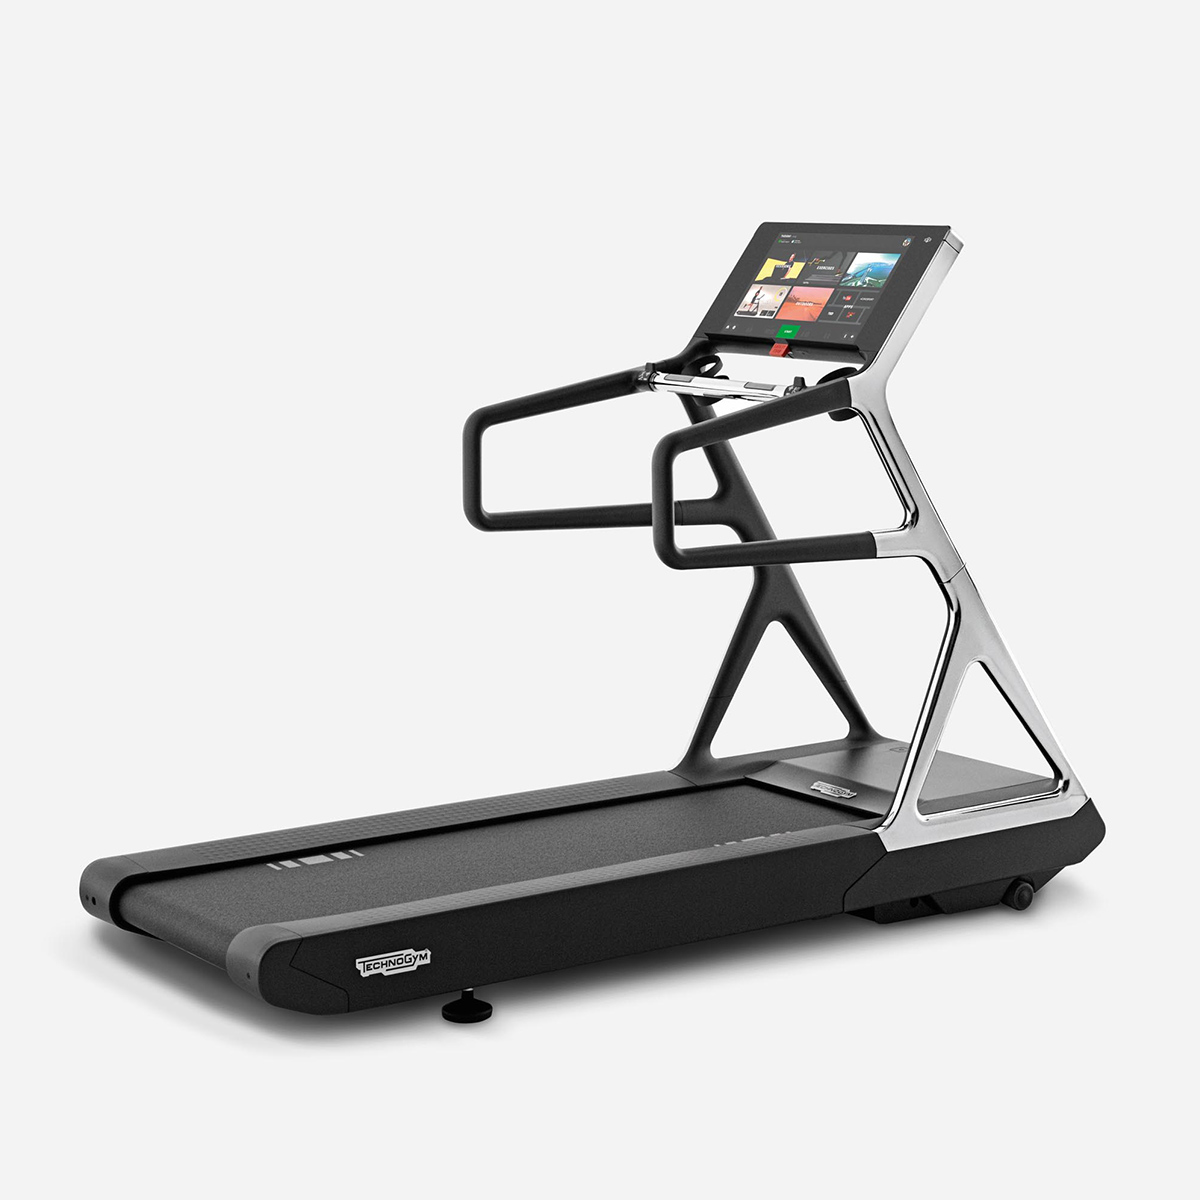 Technogym Unica: The complete home multi gym for personal training 